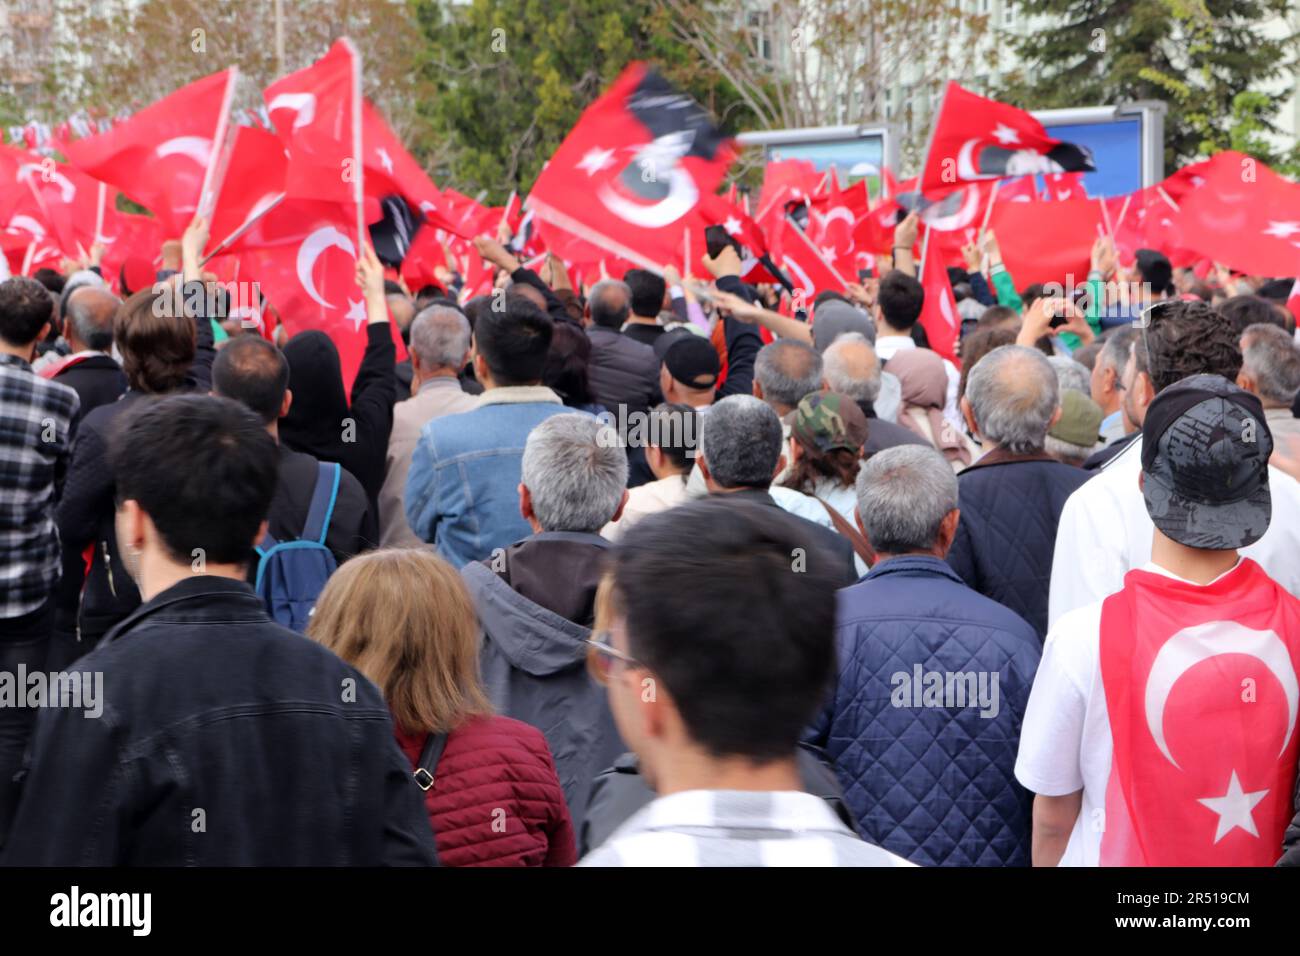 People waving Turkish flag at election rally in Turkey Stock Photo